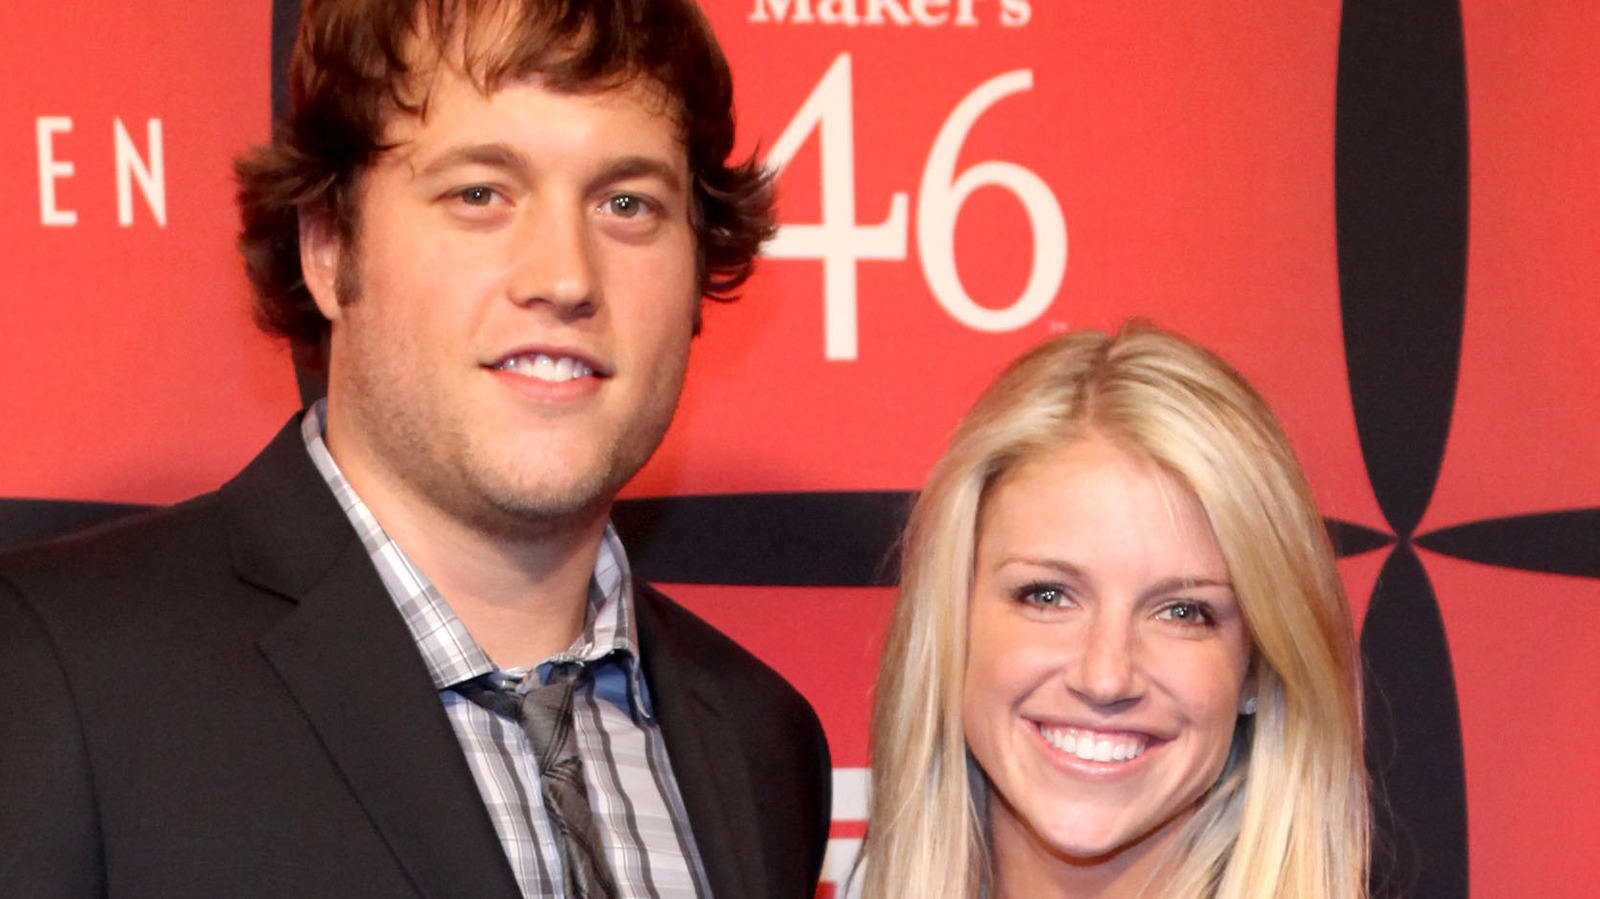 Matthew Stafford's wife blames NFL for harassment received after